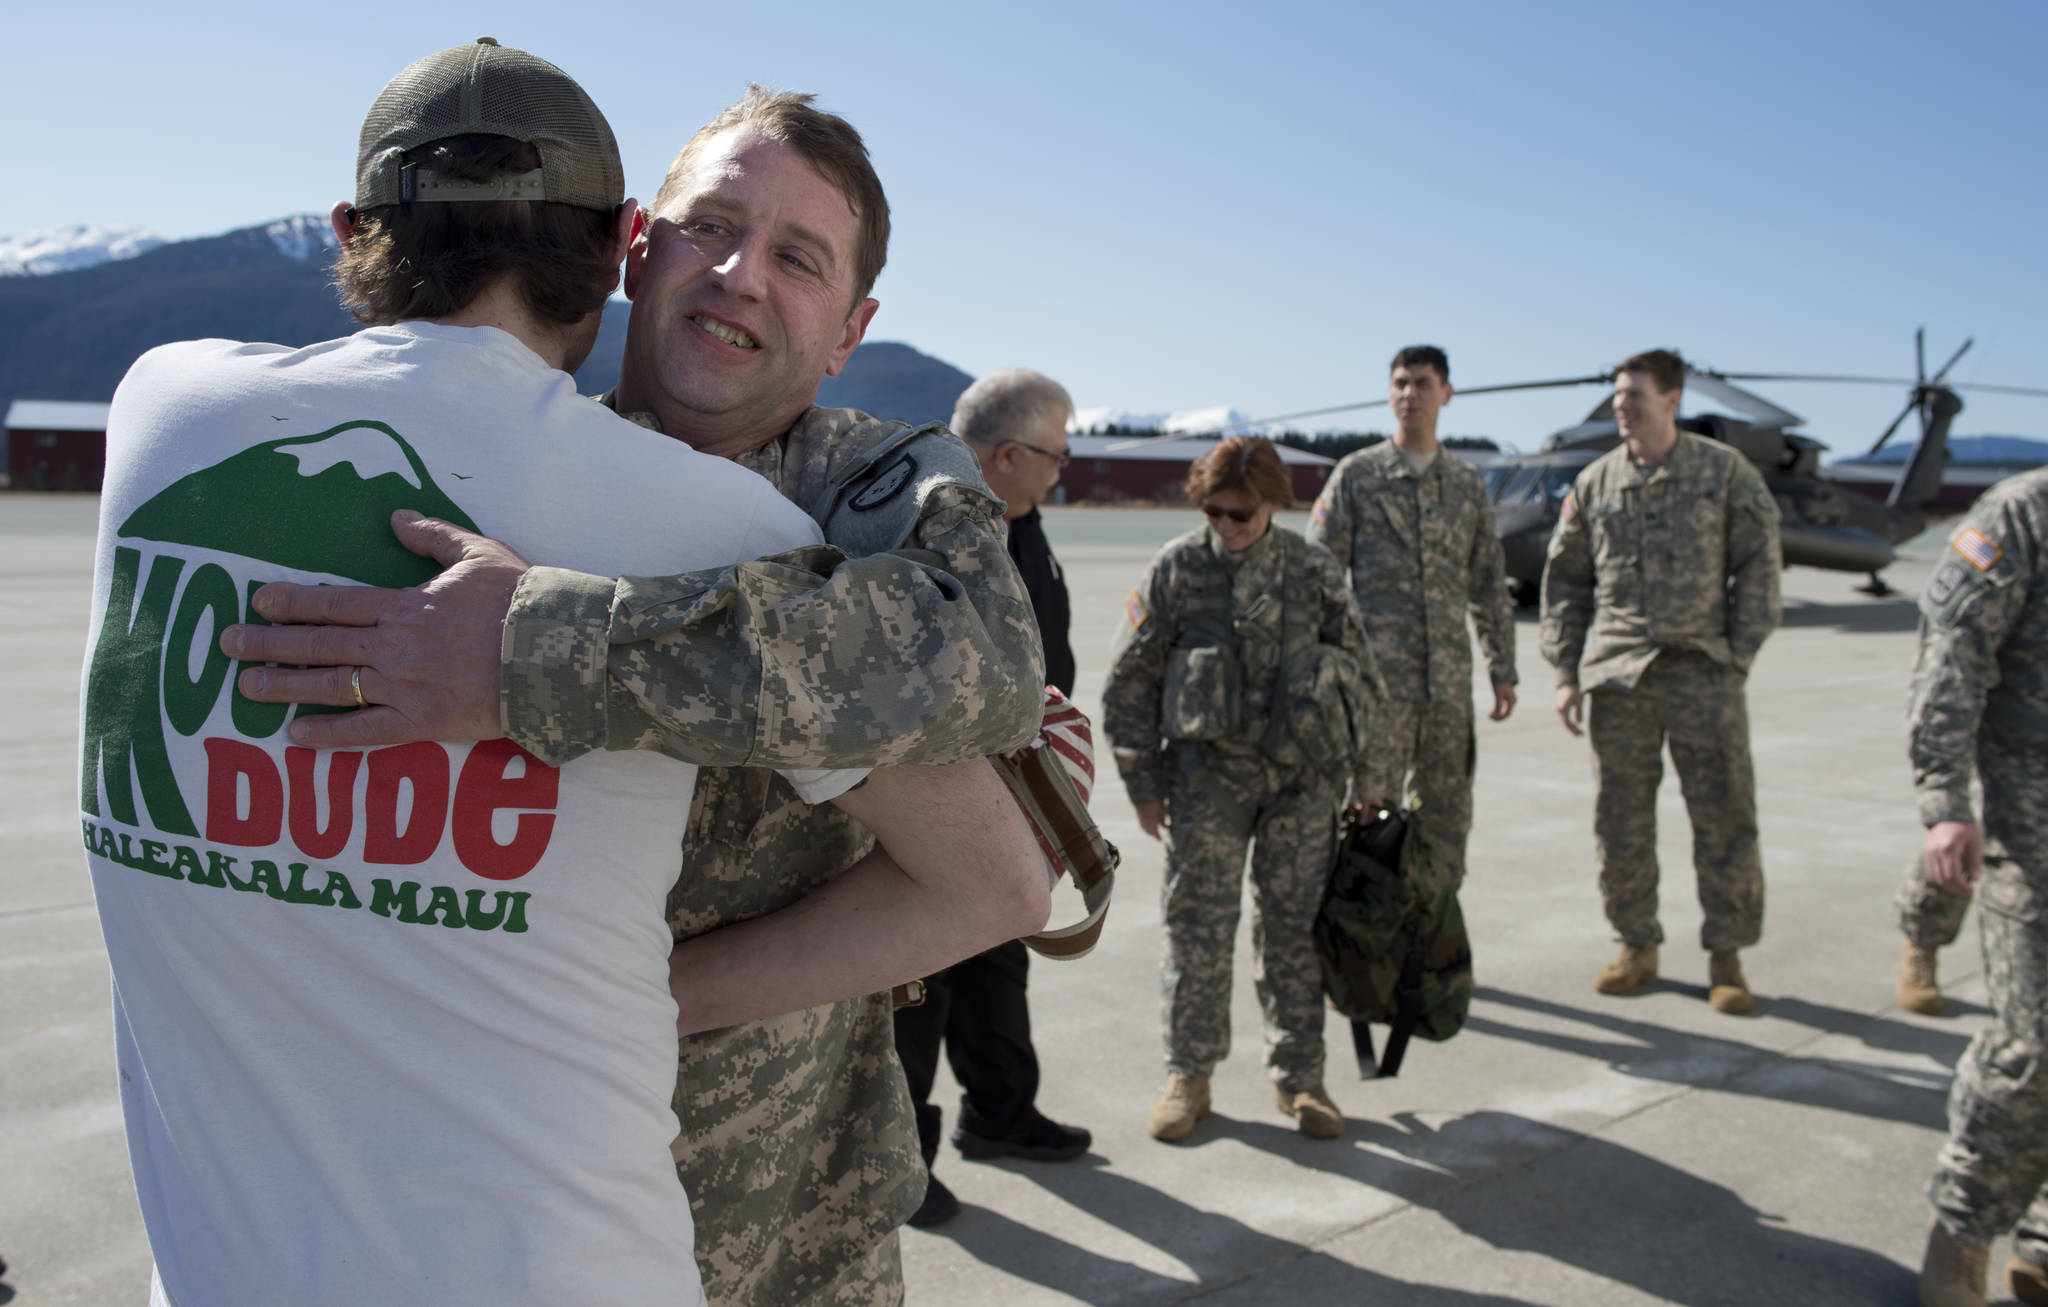 Alaska Army National Guard Chief Warrant Officer 4 Mike Michaud receives a hug from his son, Kevin, at the Juneau International Airport after taking his last flight in the Guard’s Black Hawk helicopter on Wednesday.  Michael Penn | Juneau Empire